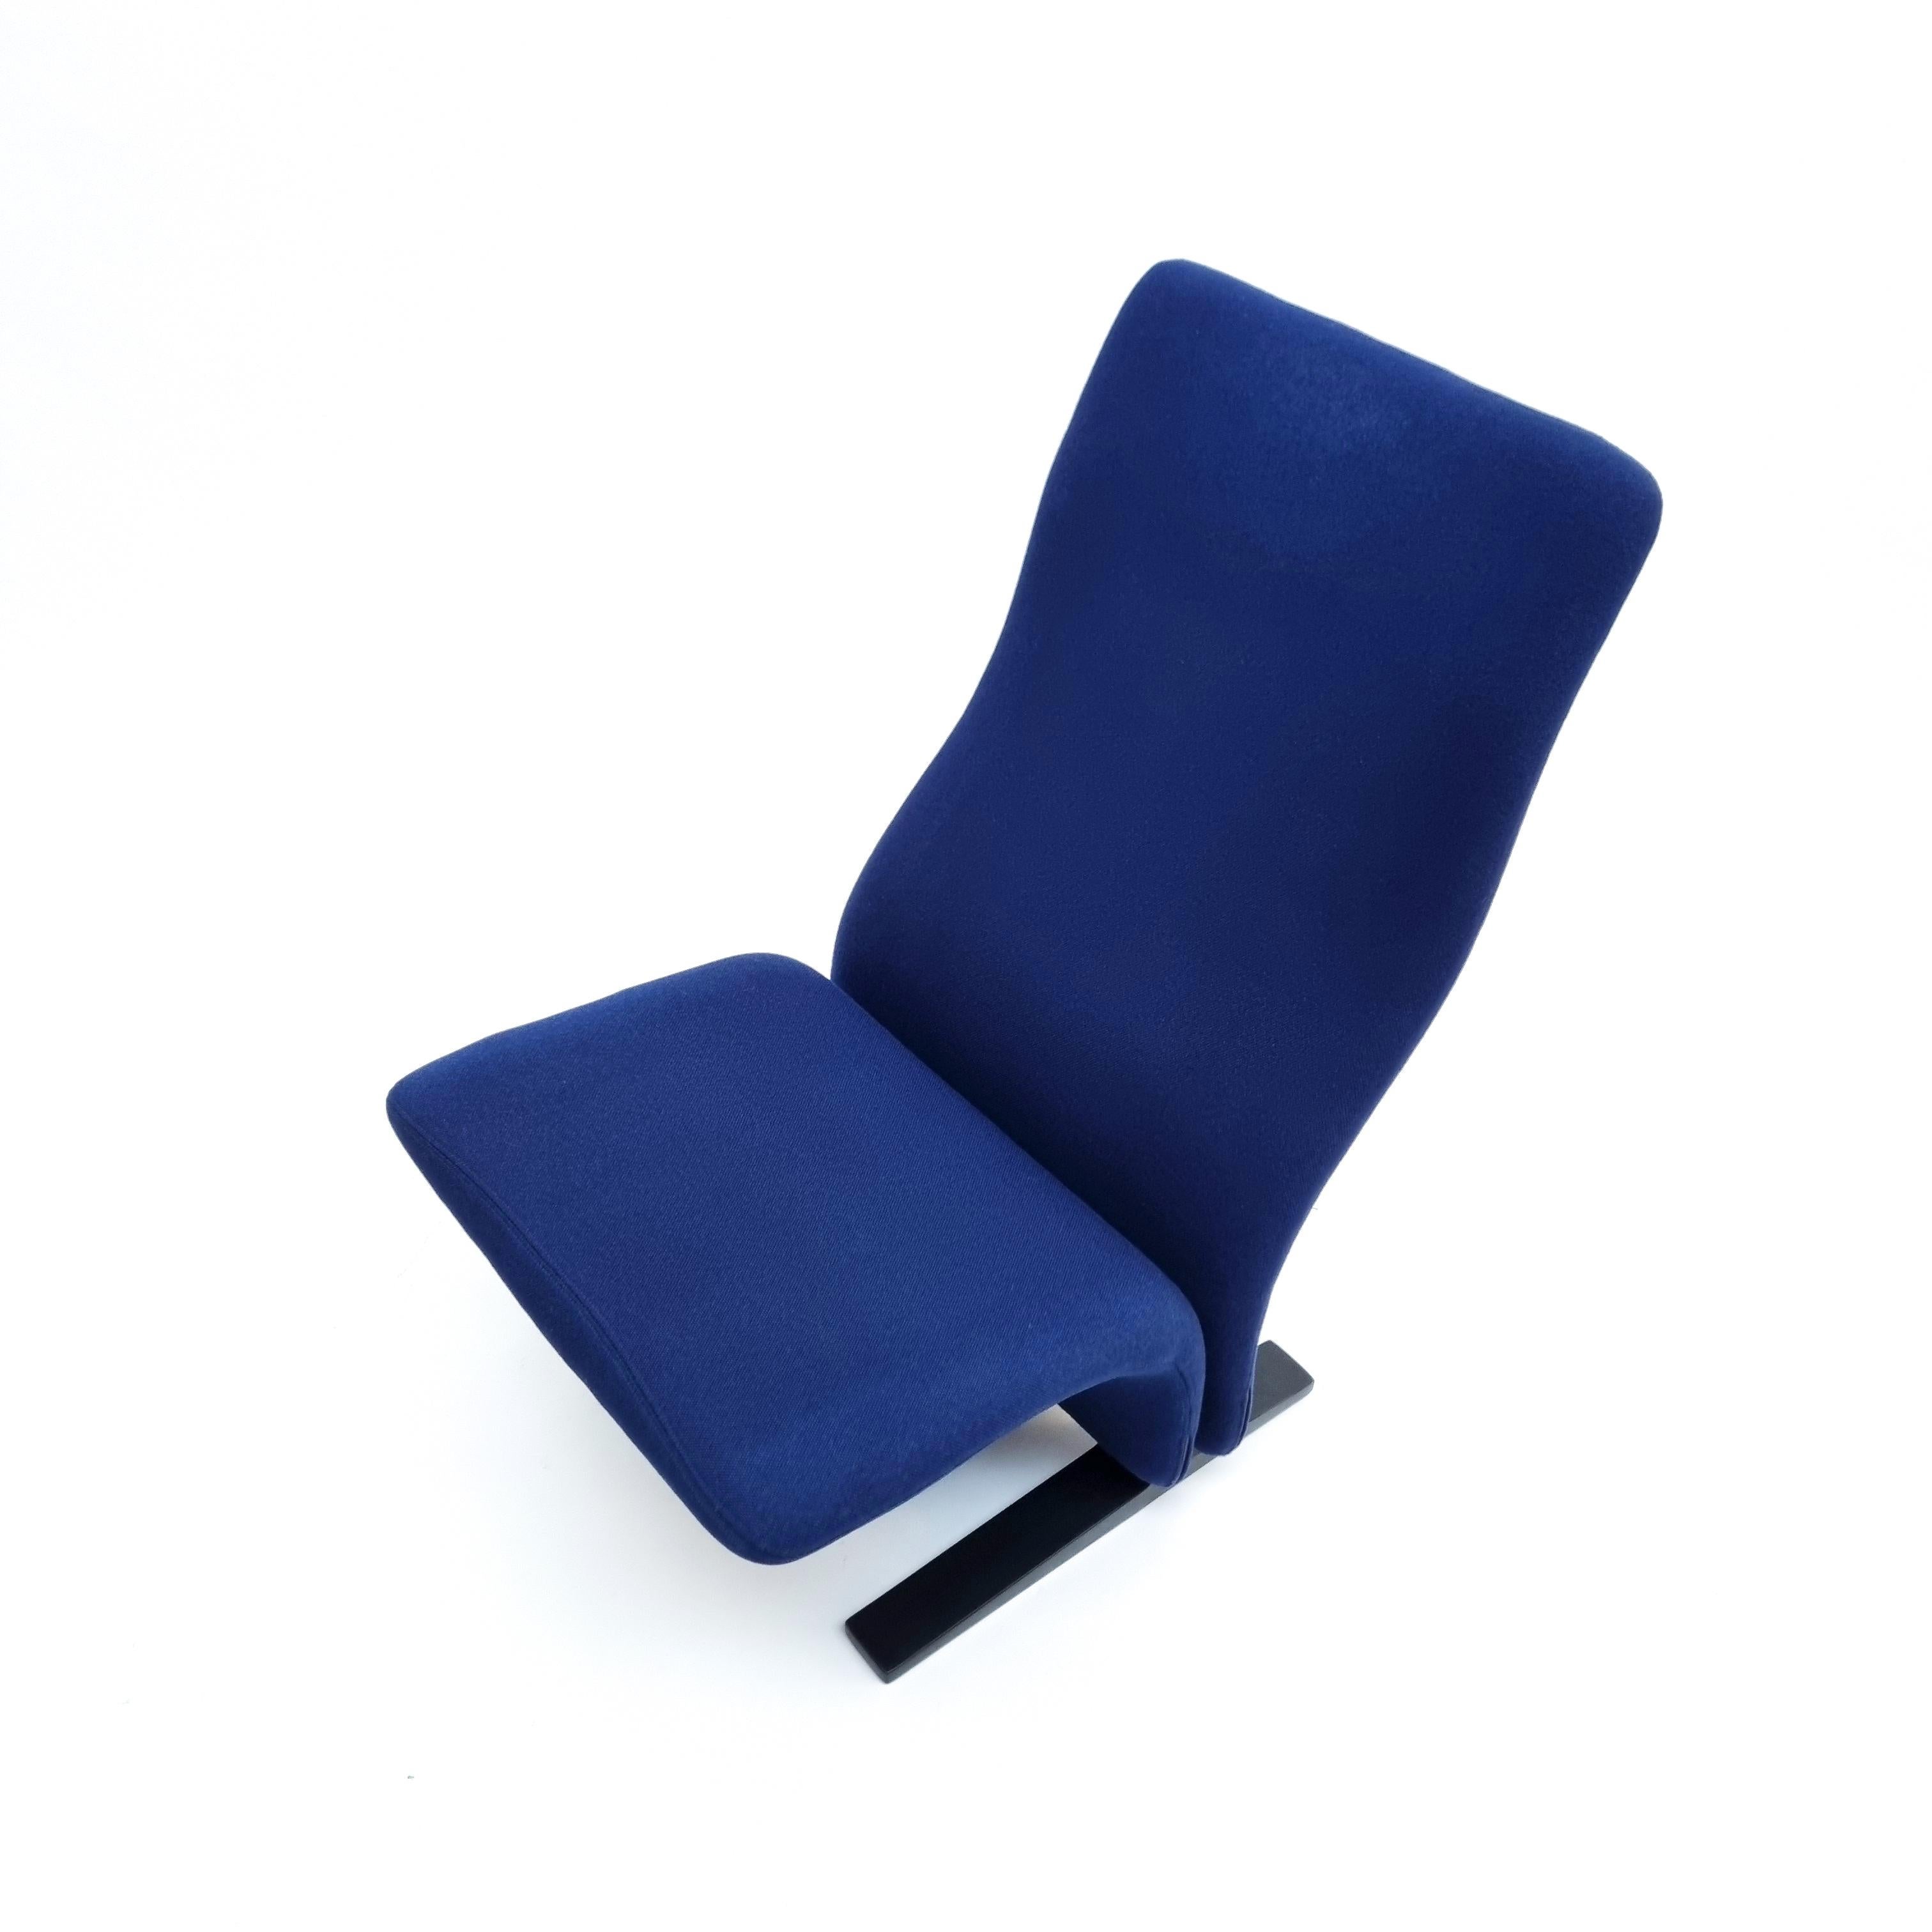 Wool F784 “Concorde” Lounge Chair by Pierre Paulin for Artifort, 1980s For Sale